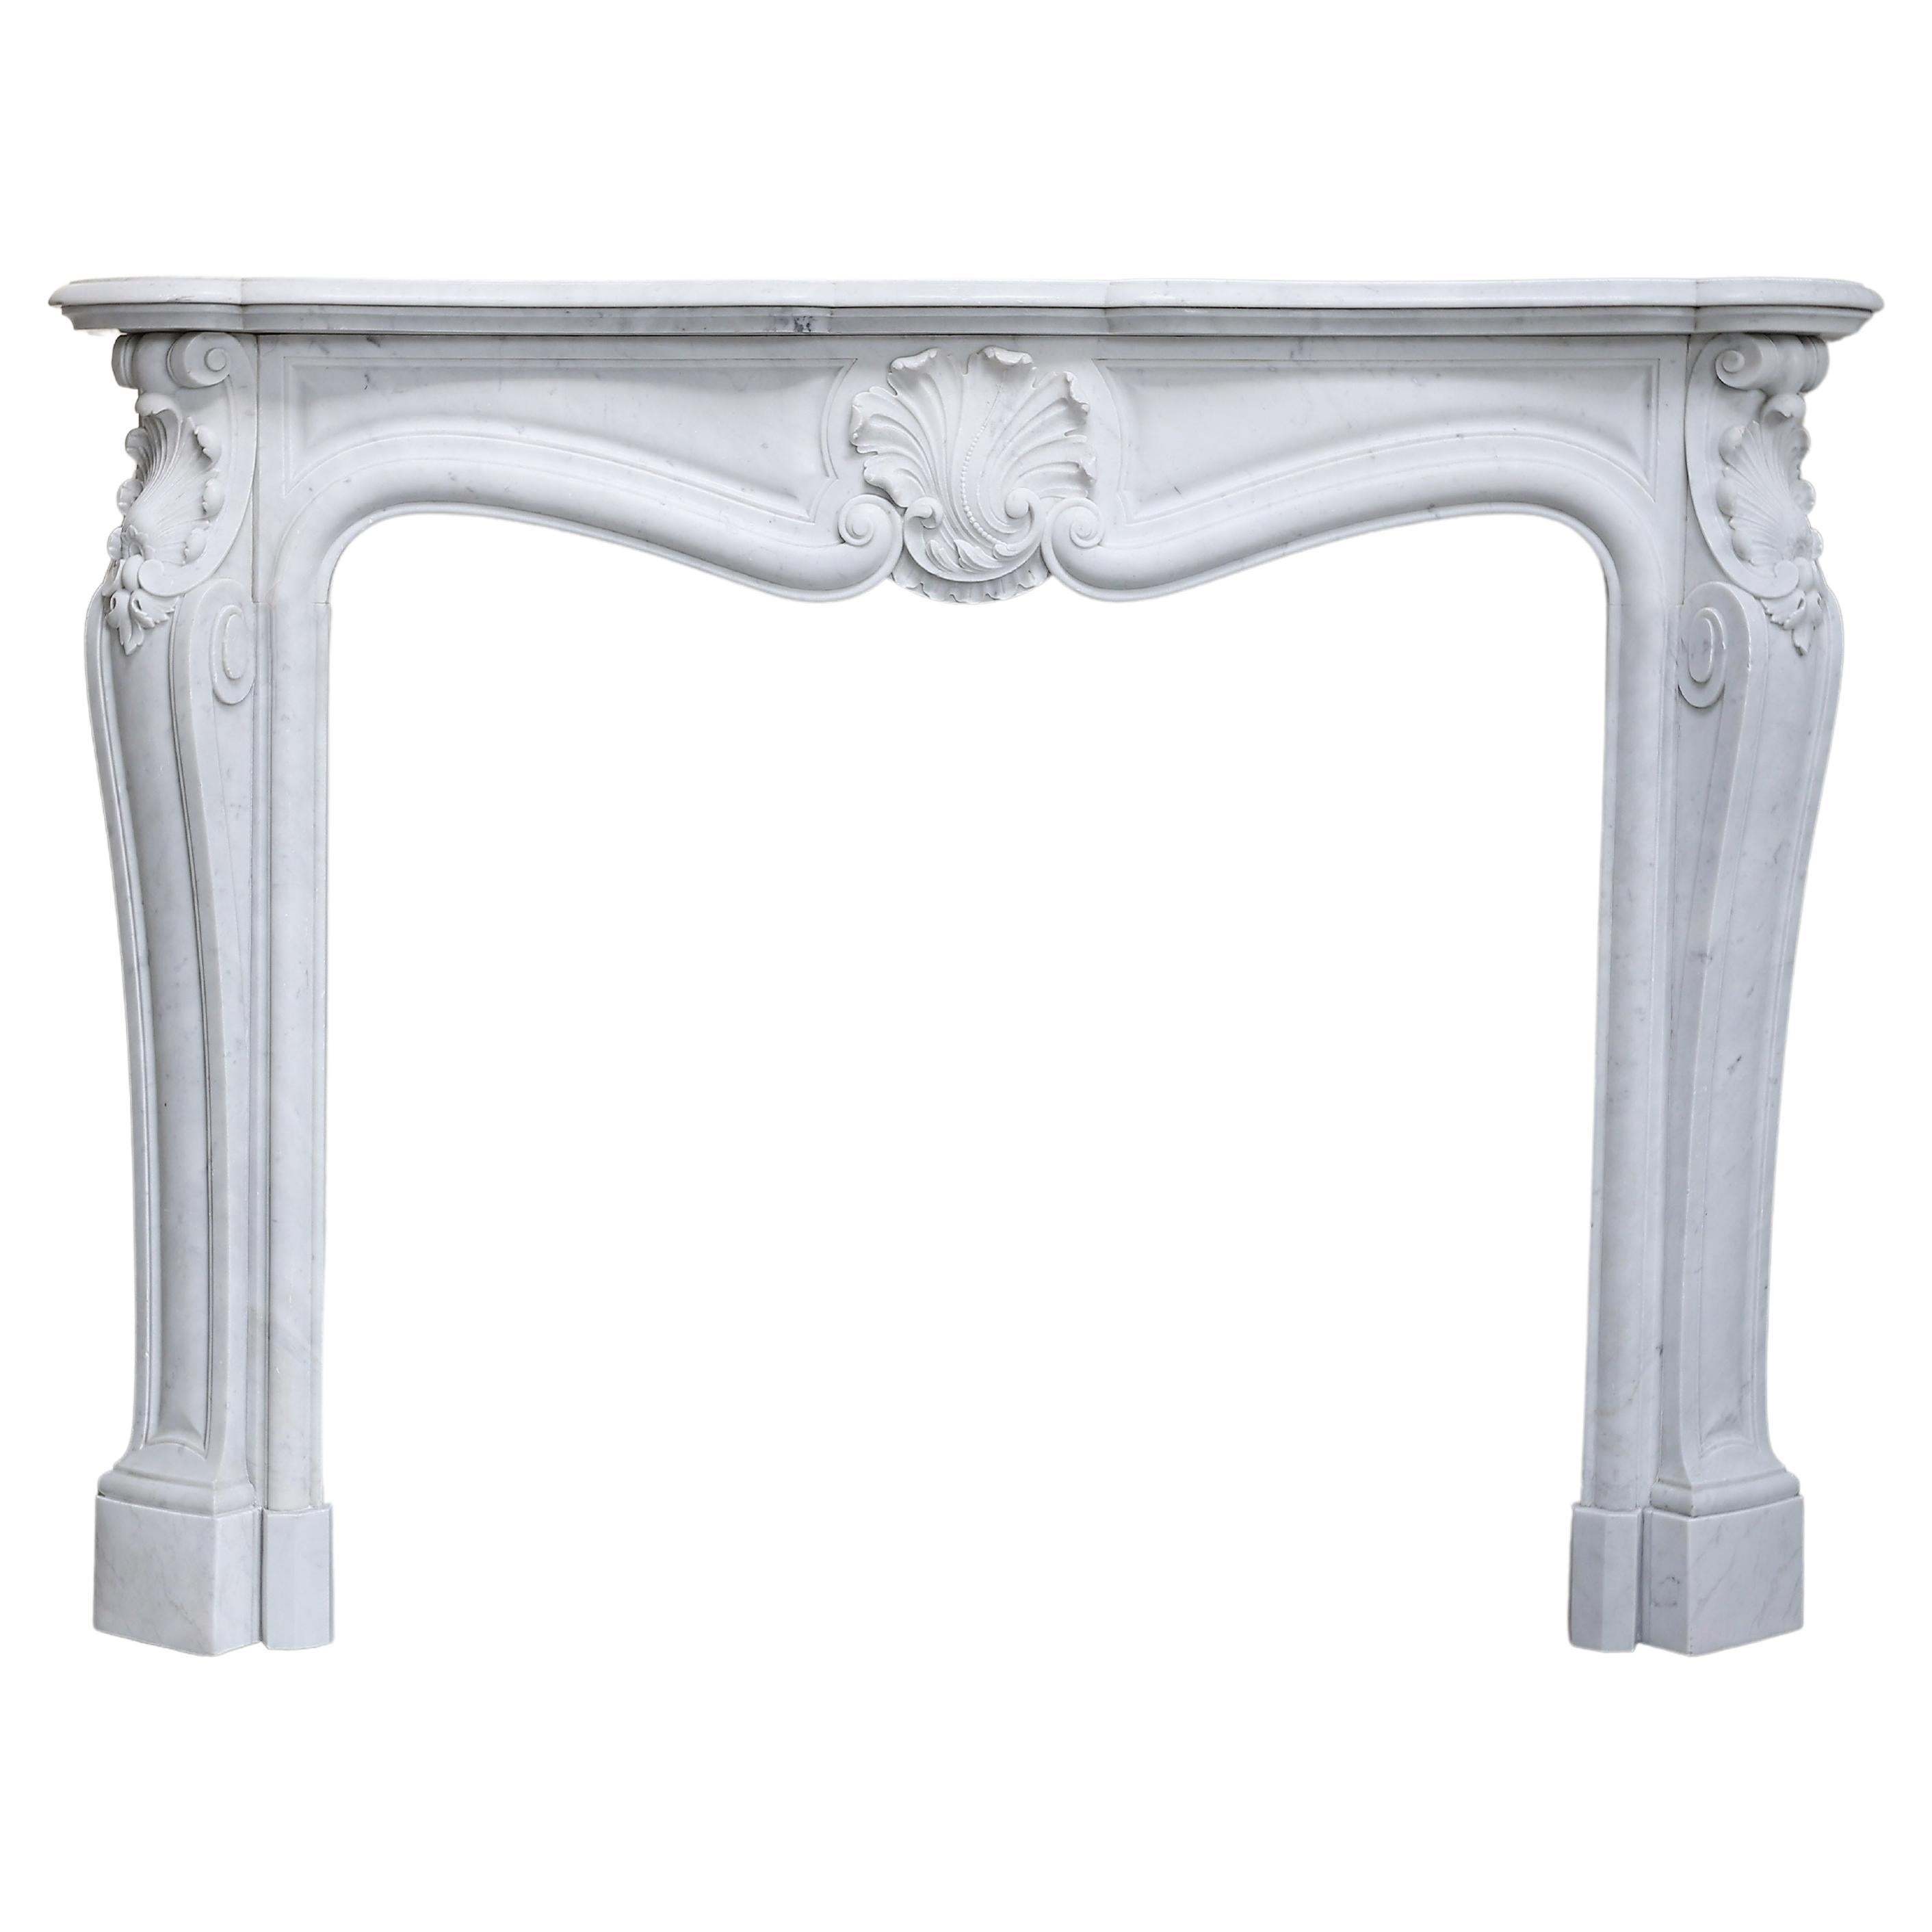 Antique Fireplace of Carrara Marble in Style of Louis XV from the 19th Century For Sale